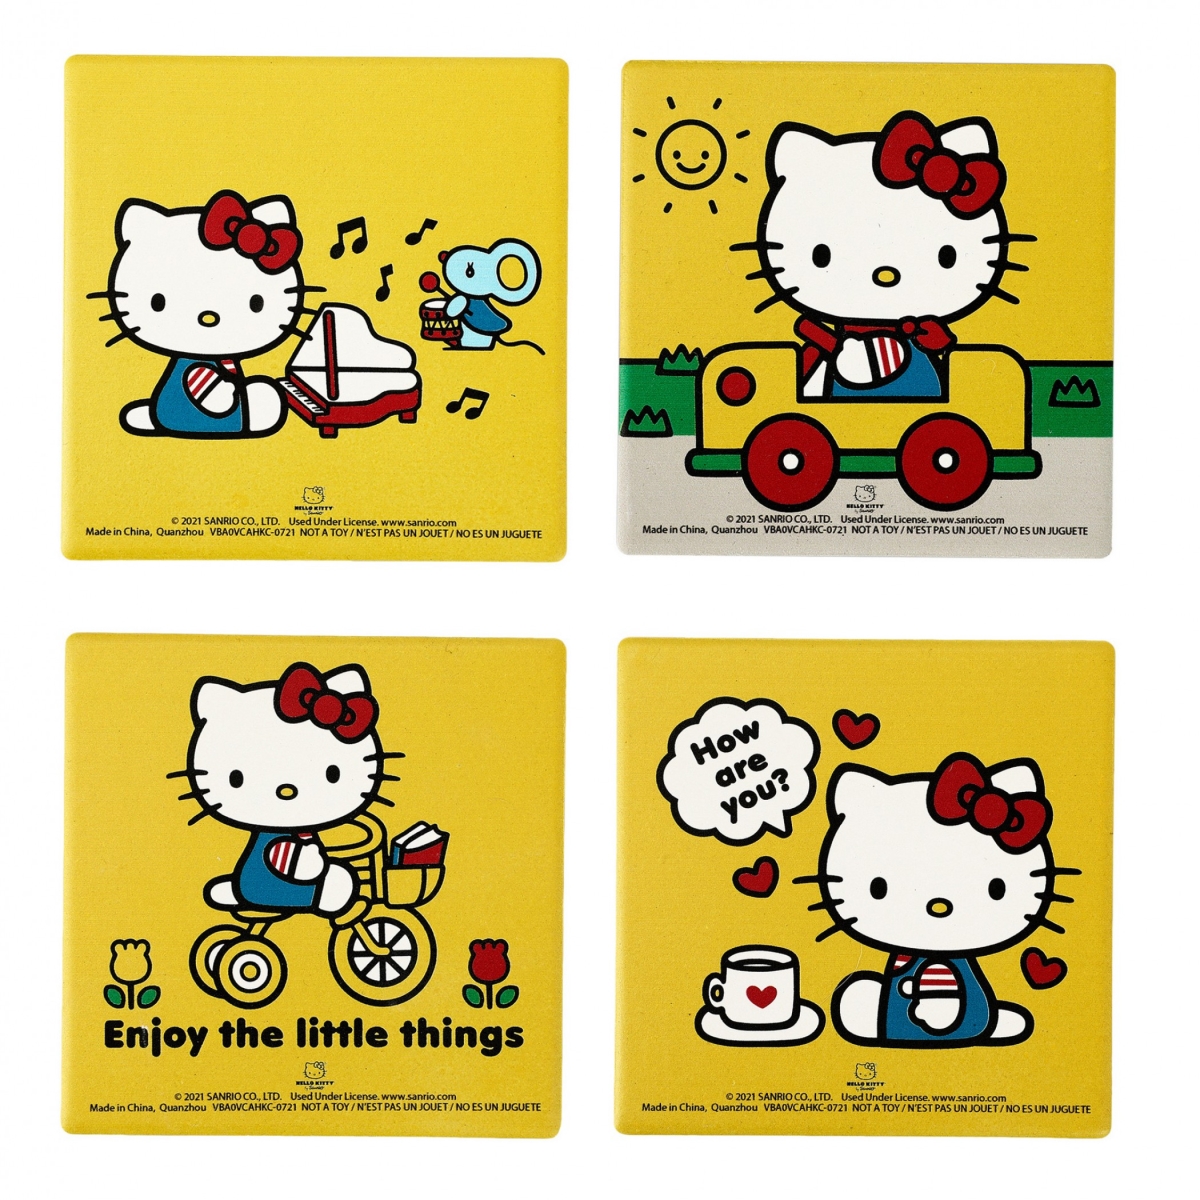 Hello Kitty 865993 Enjoy The Little Things Variety Ceramic Coaster Set - Pack of 4